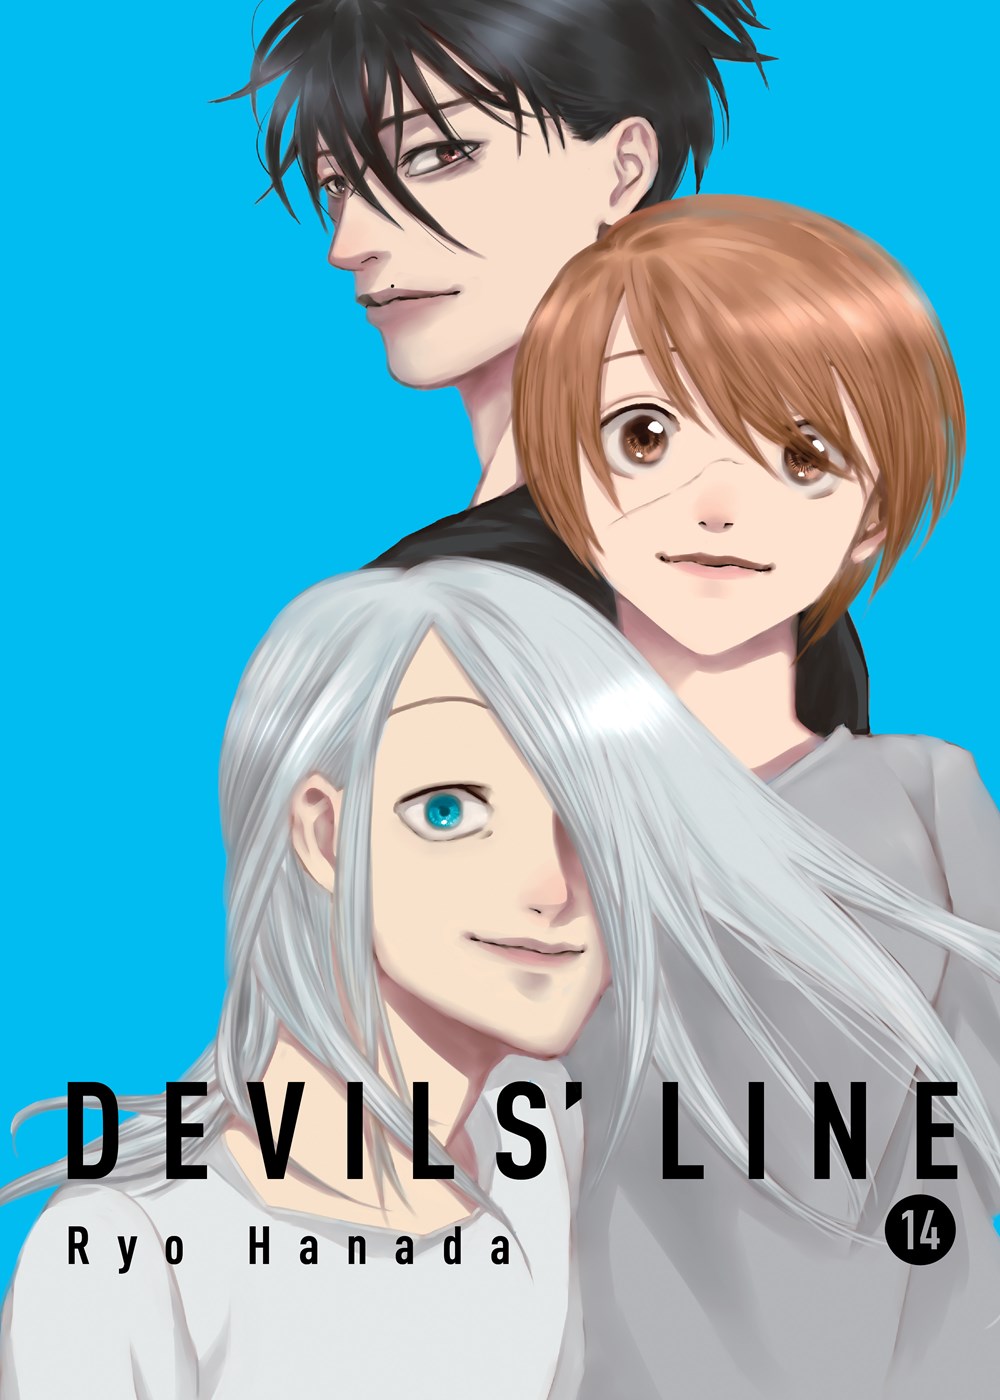 Devils Line Volume 14 Review Theoasg